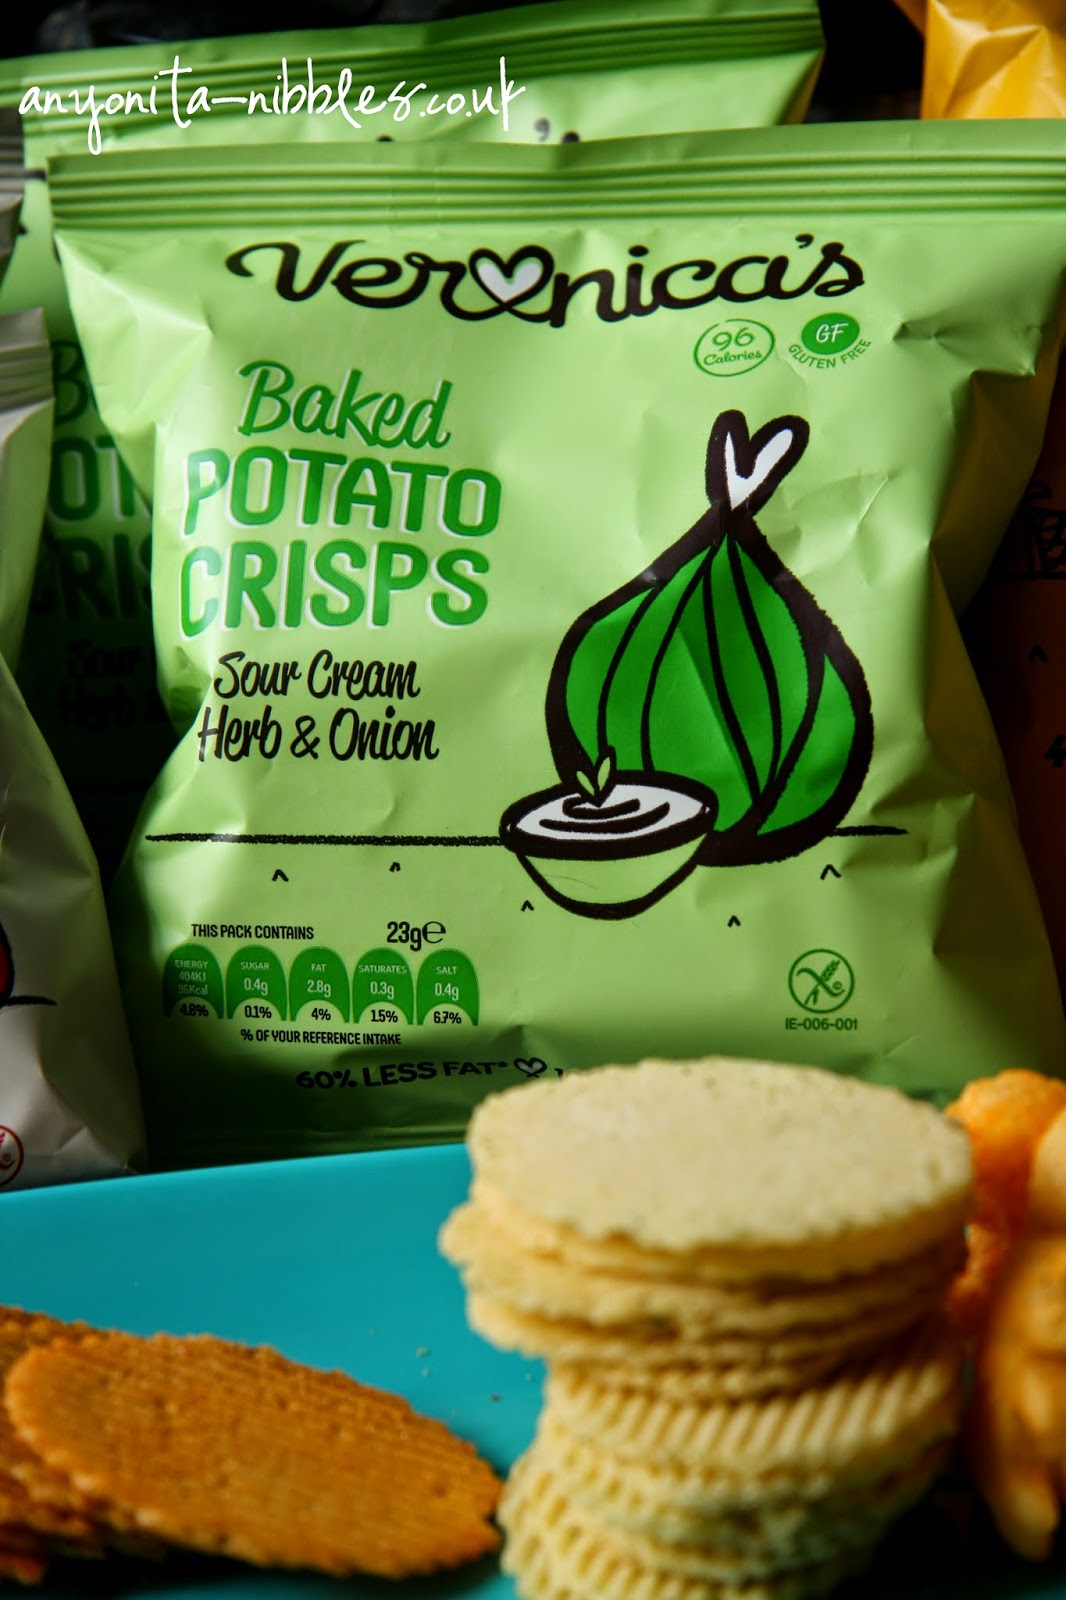 Veronica's potato crisps in sour cream, herb & onion from Anyonita-nibbles.co.uk